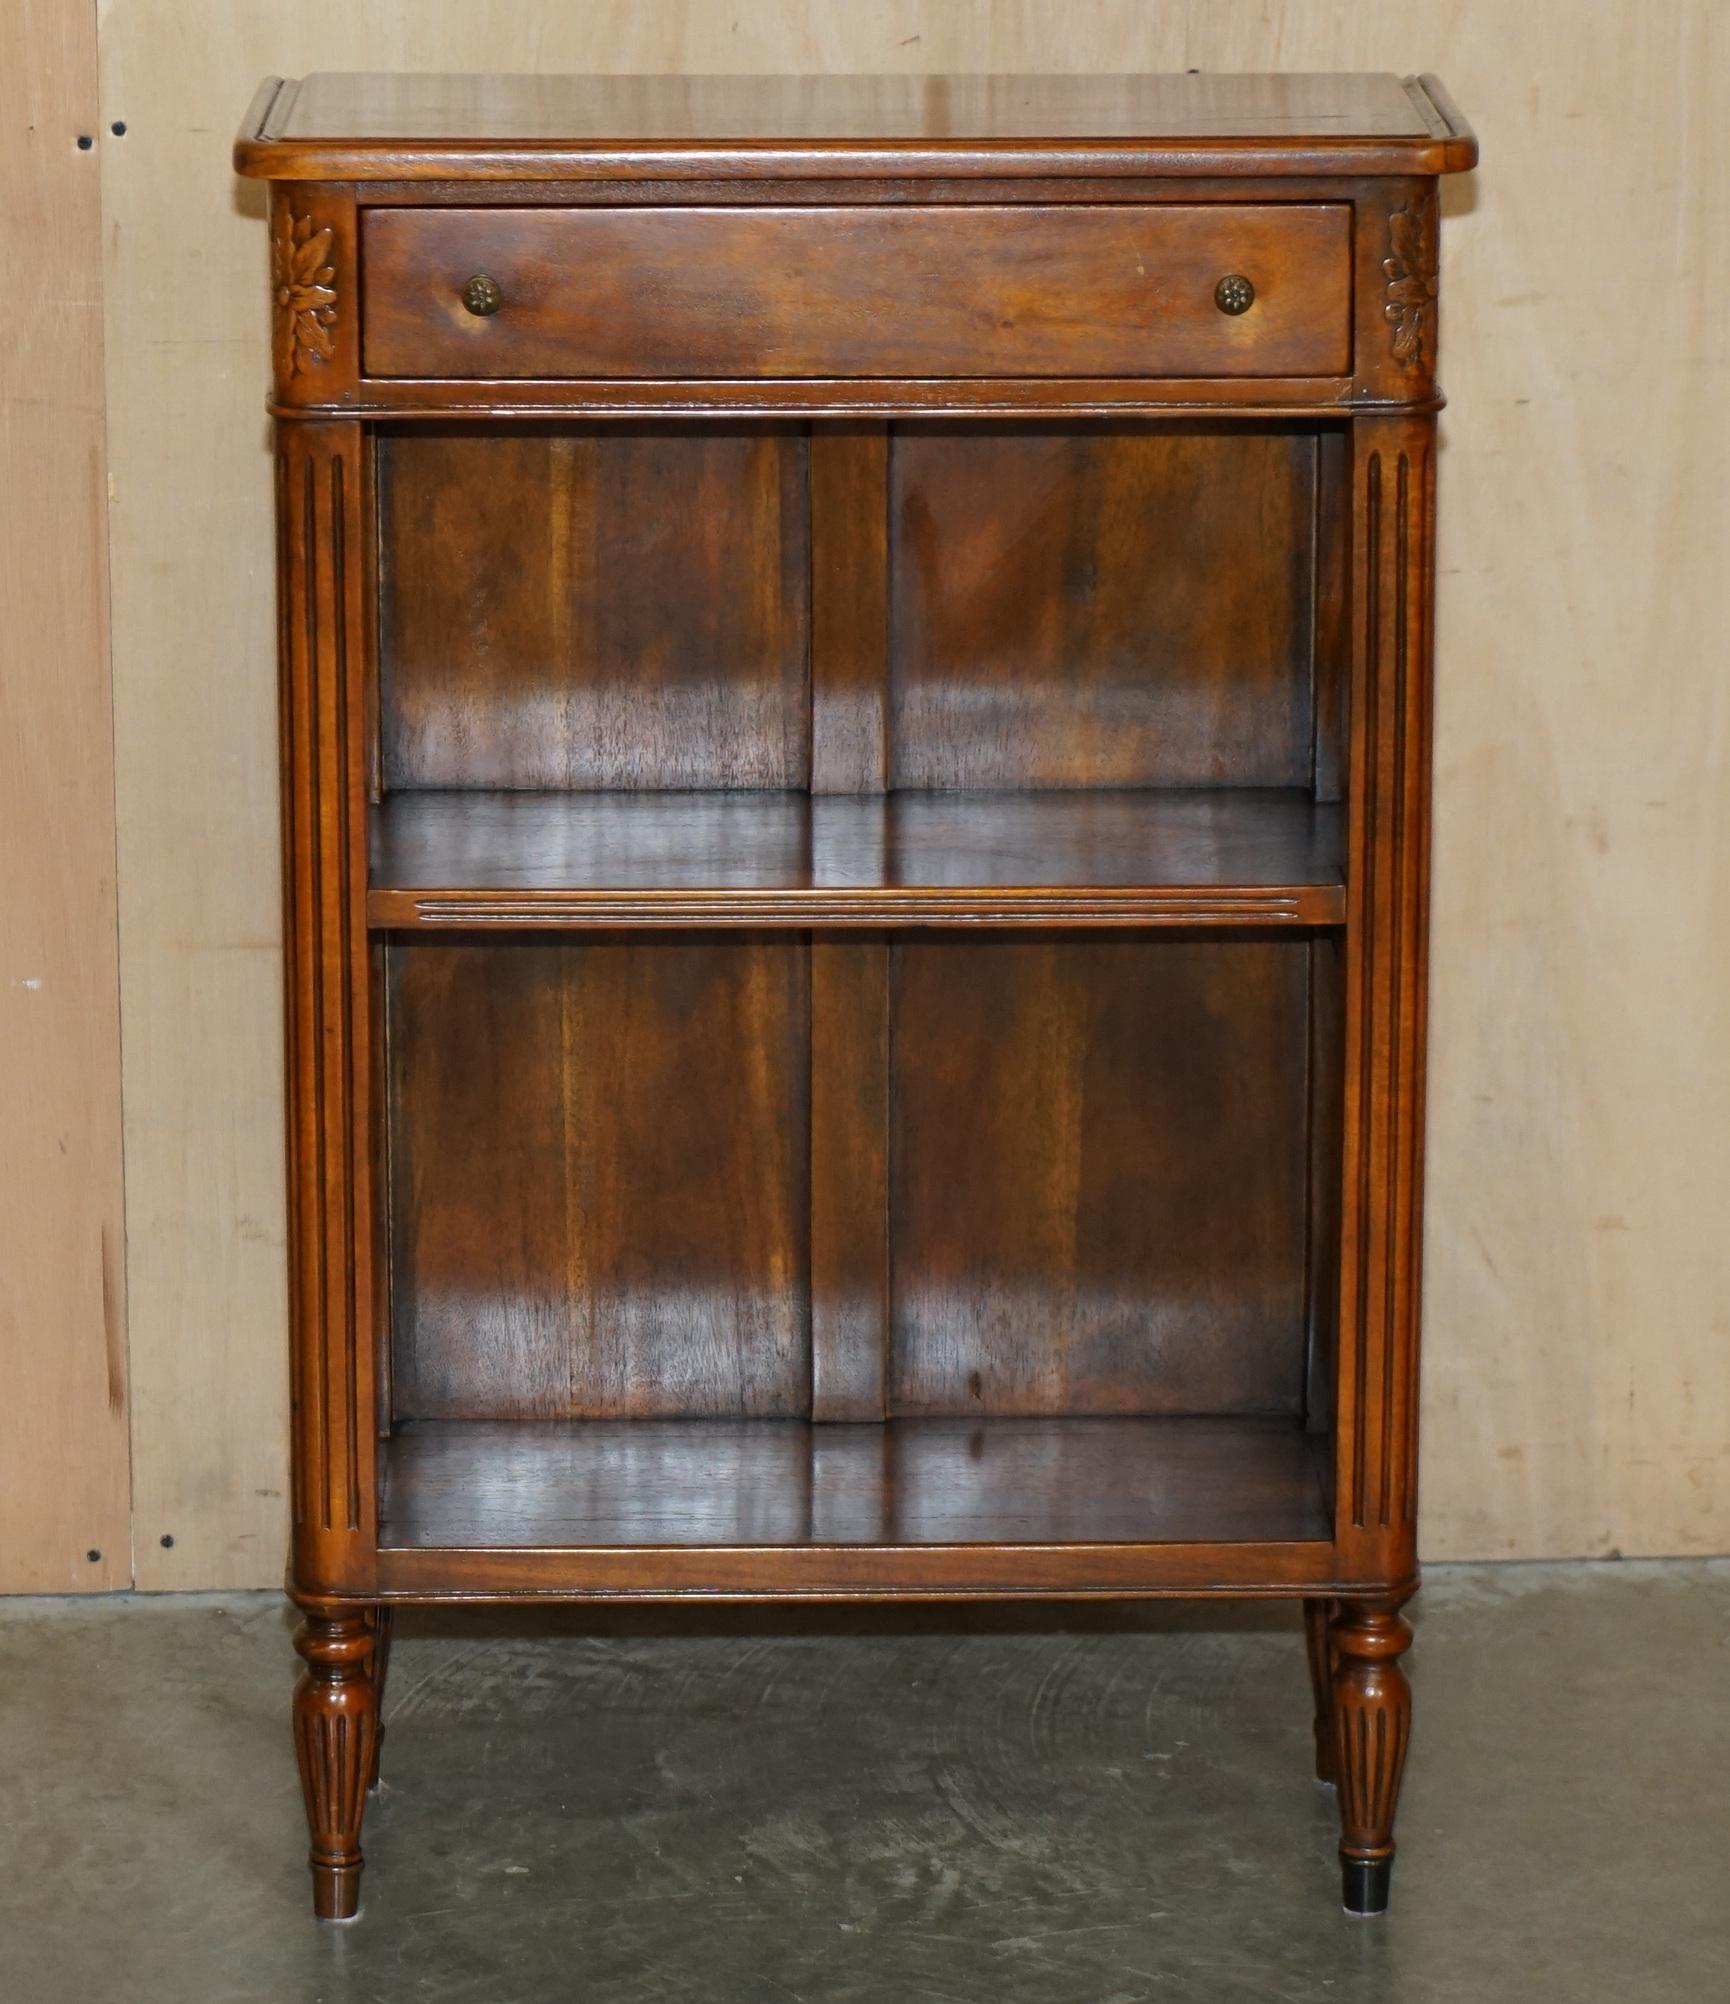 Royal House Antiques

Royal House Antiques is delighted to offer for this lovely Theodore Alexander dwarf open library bookcase with single drawer

Please note the delivery fee listed is just a guide, it covers within the M25 only for the UK and